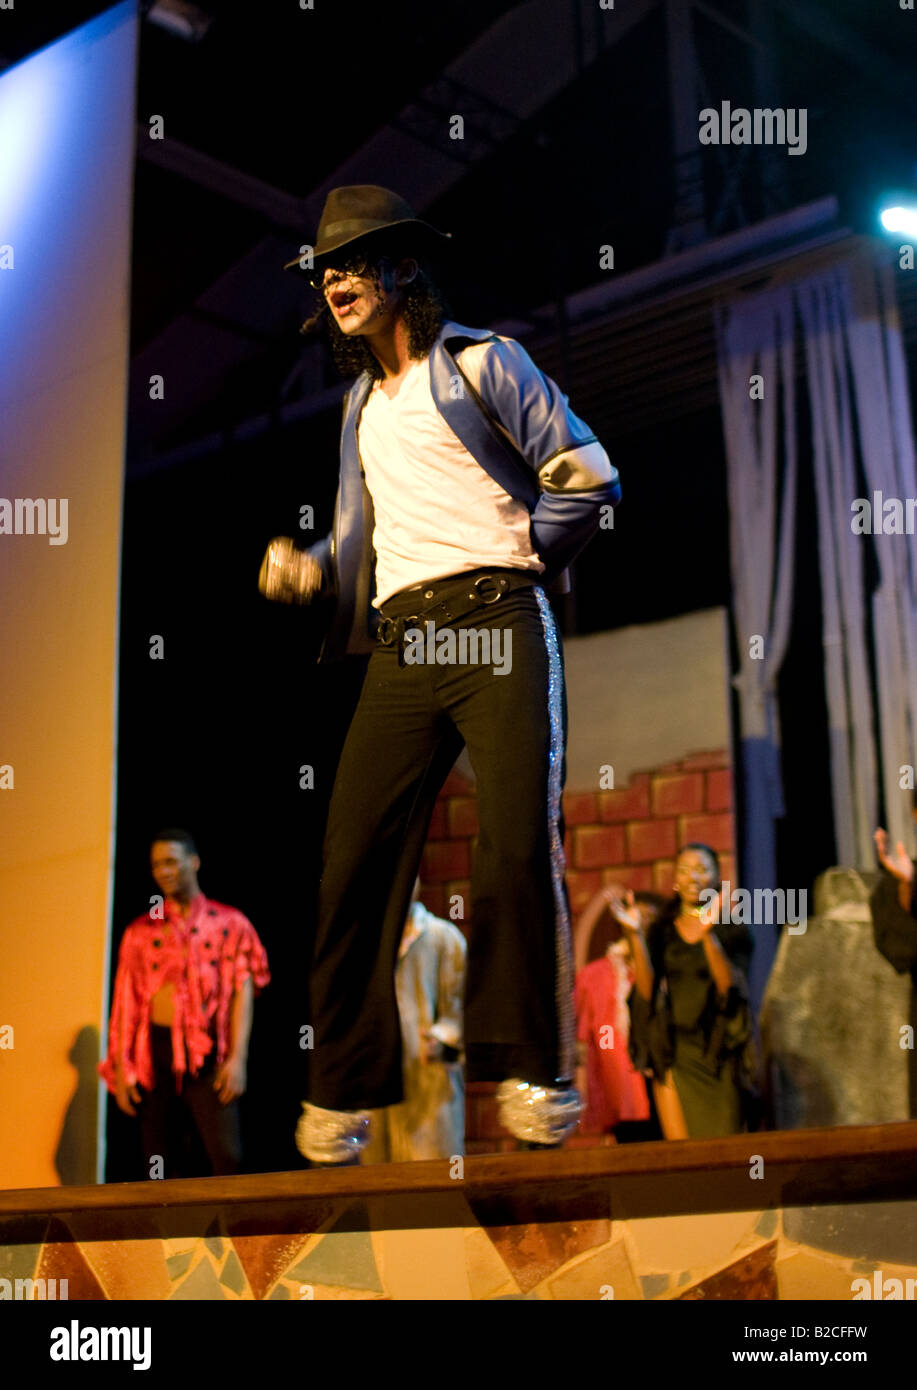 Caribbean Dominican Republic Barcelo Punta Cana all inclusive resort Michael Jackson impersonator dancing on stage at resort Stock Photo